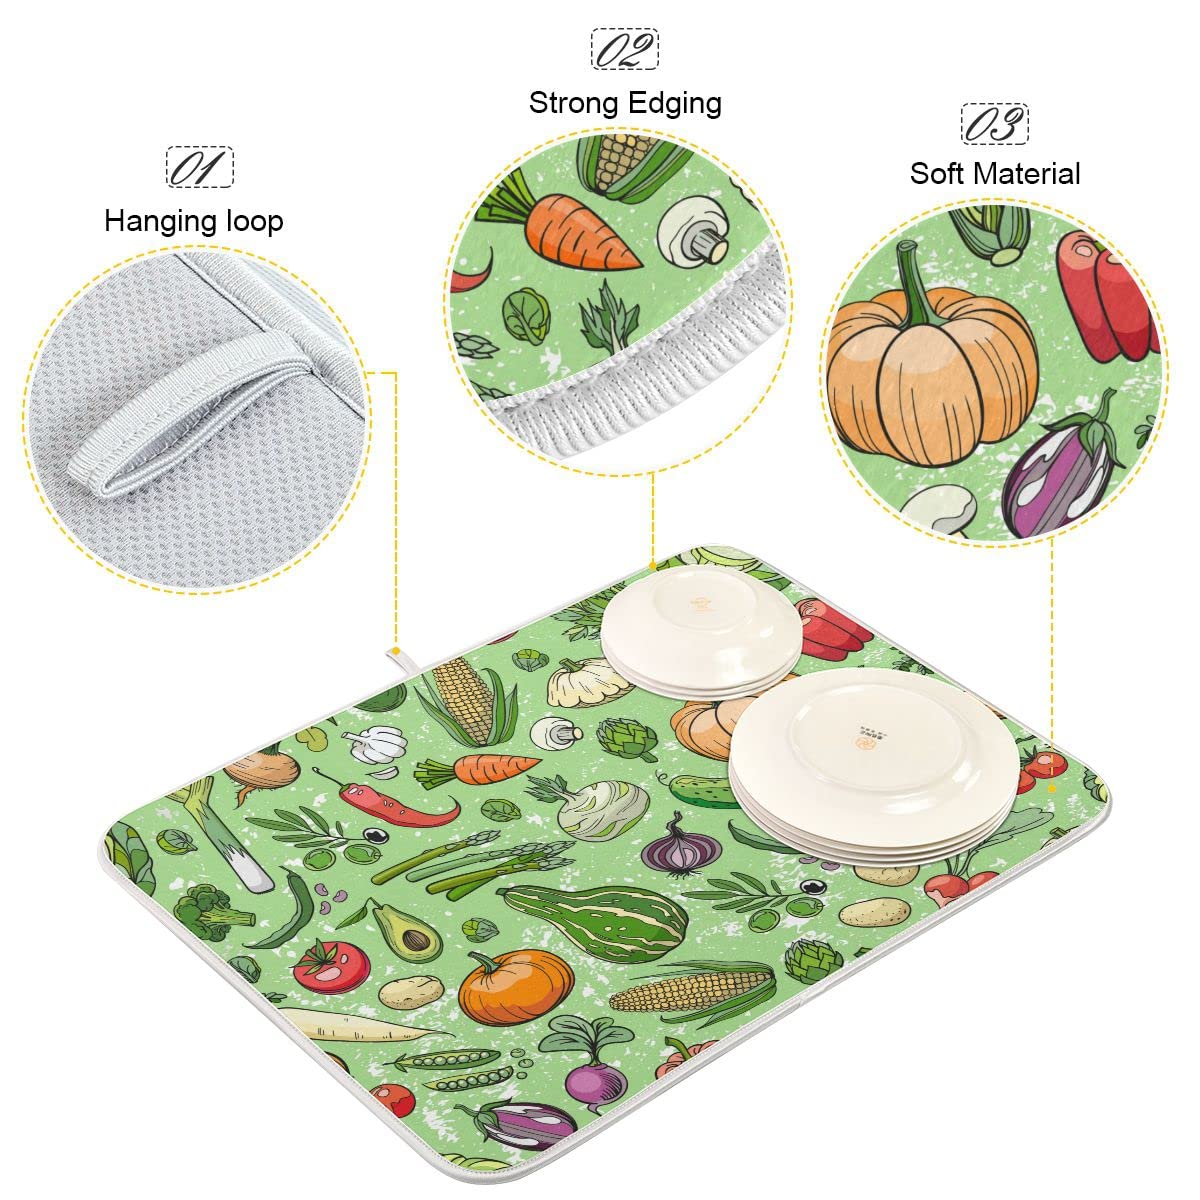 Absorbent Dish Drying Mat for Kitchen Counter - Fruit and Vegetable Microfiber Drying Pad, Reversible Drainer Mats for Countertop, Small 16 x 18 inch